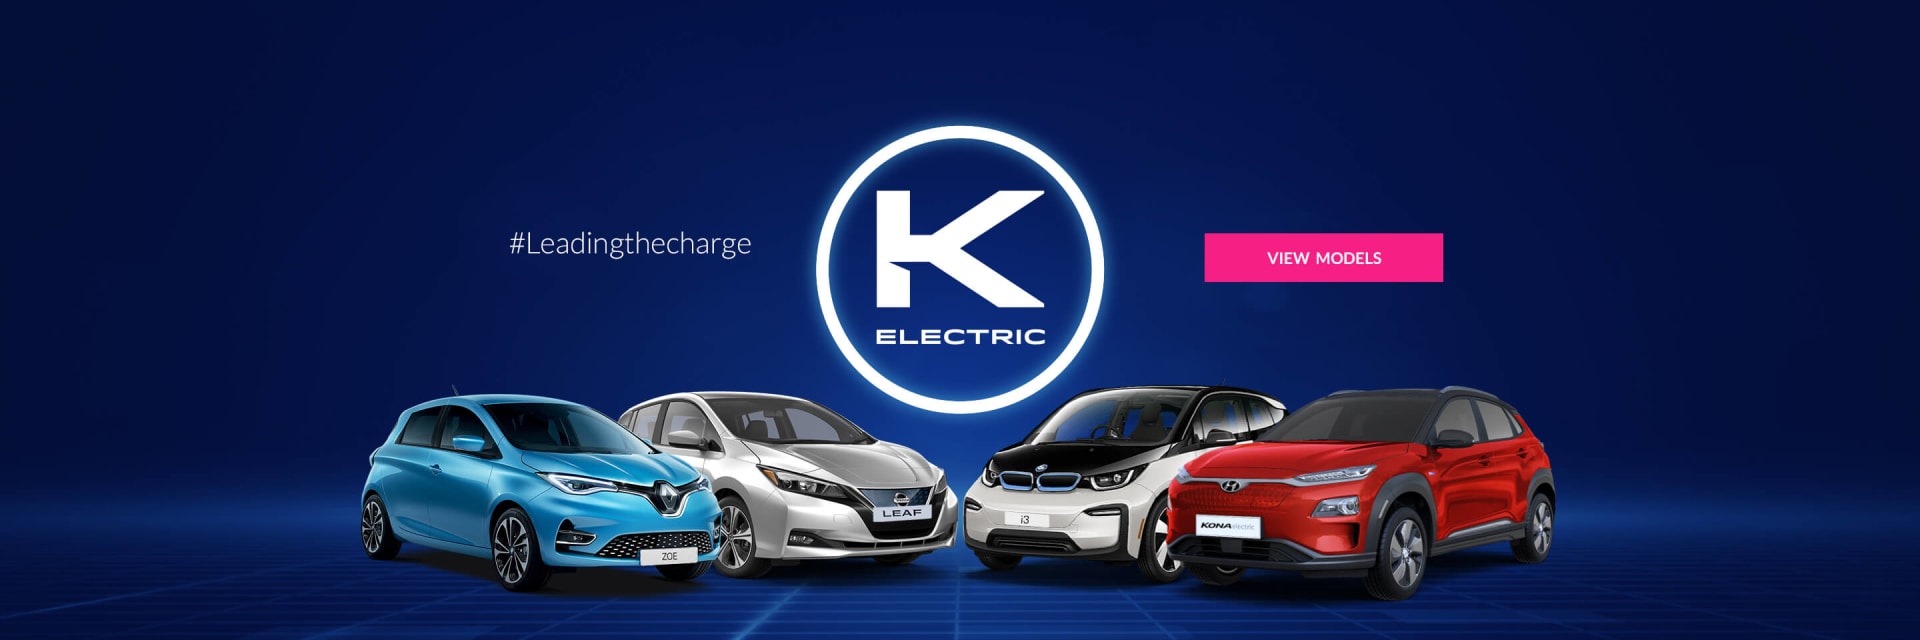 Kearys Electric Cars Buy and Drive guide